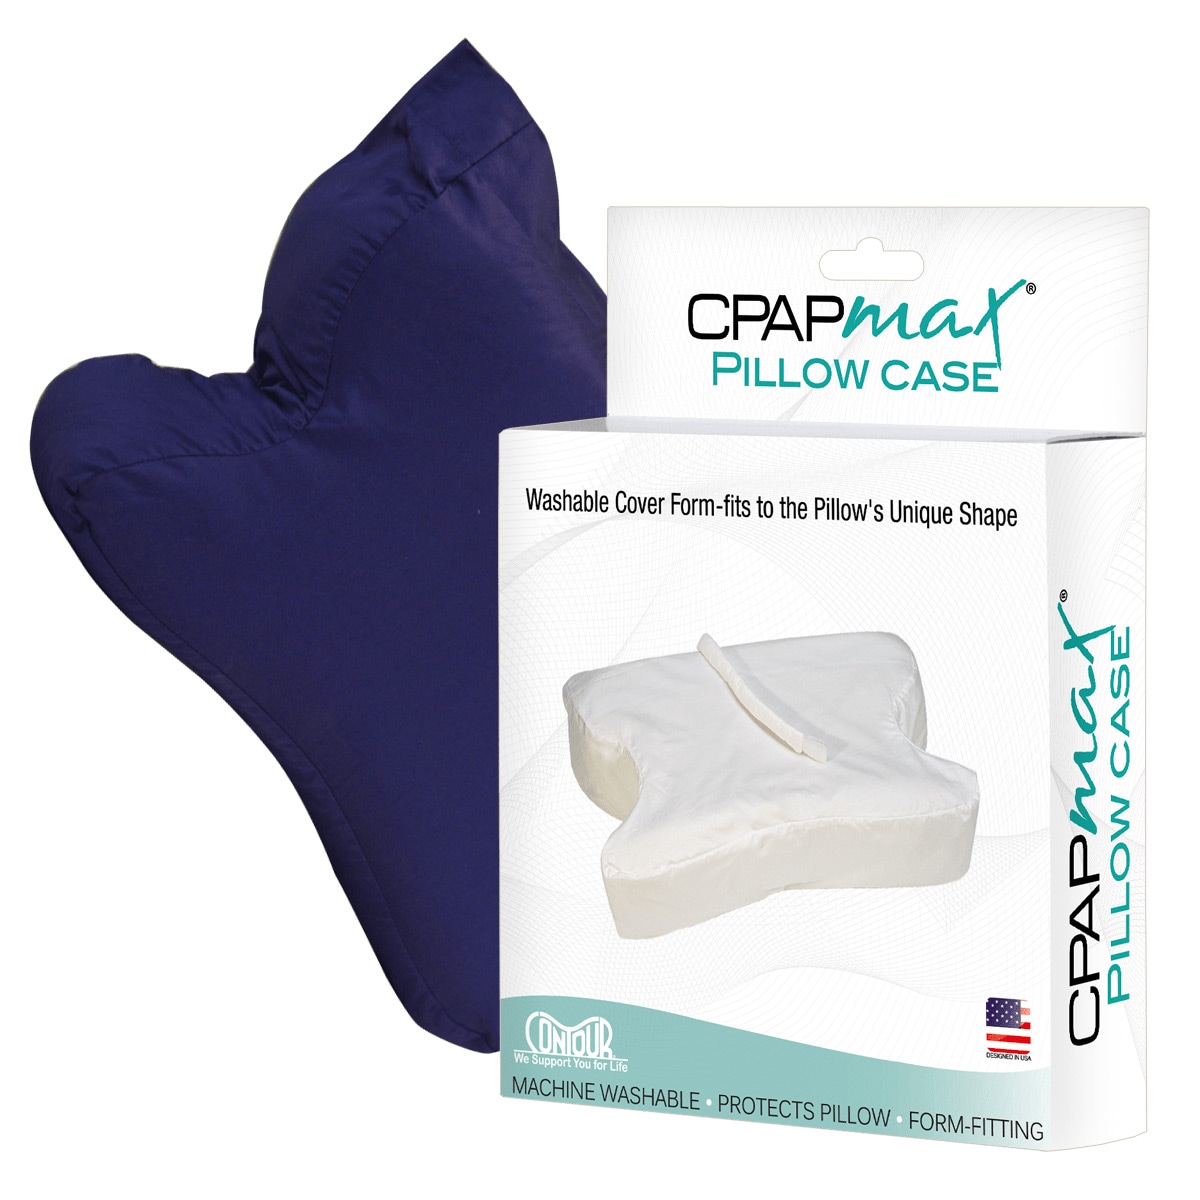 Cpapmax 20 Cpap Pillow With Removable Fitted Cover Direct Home Medical 5402